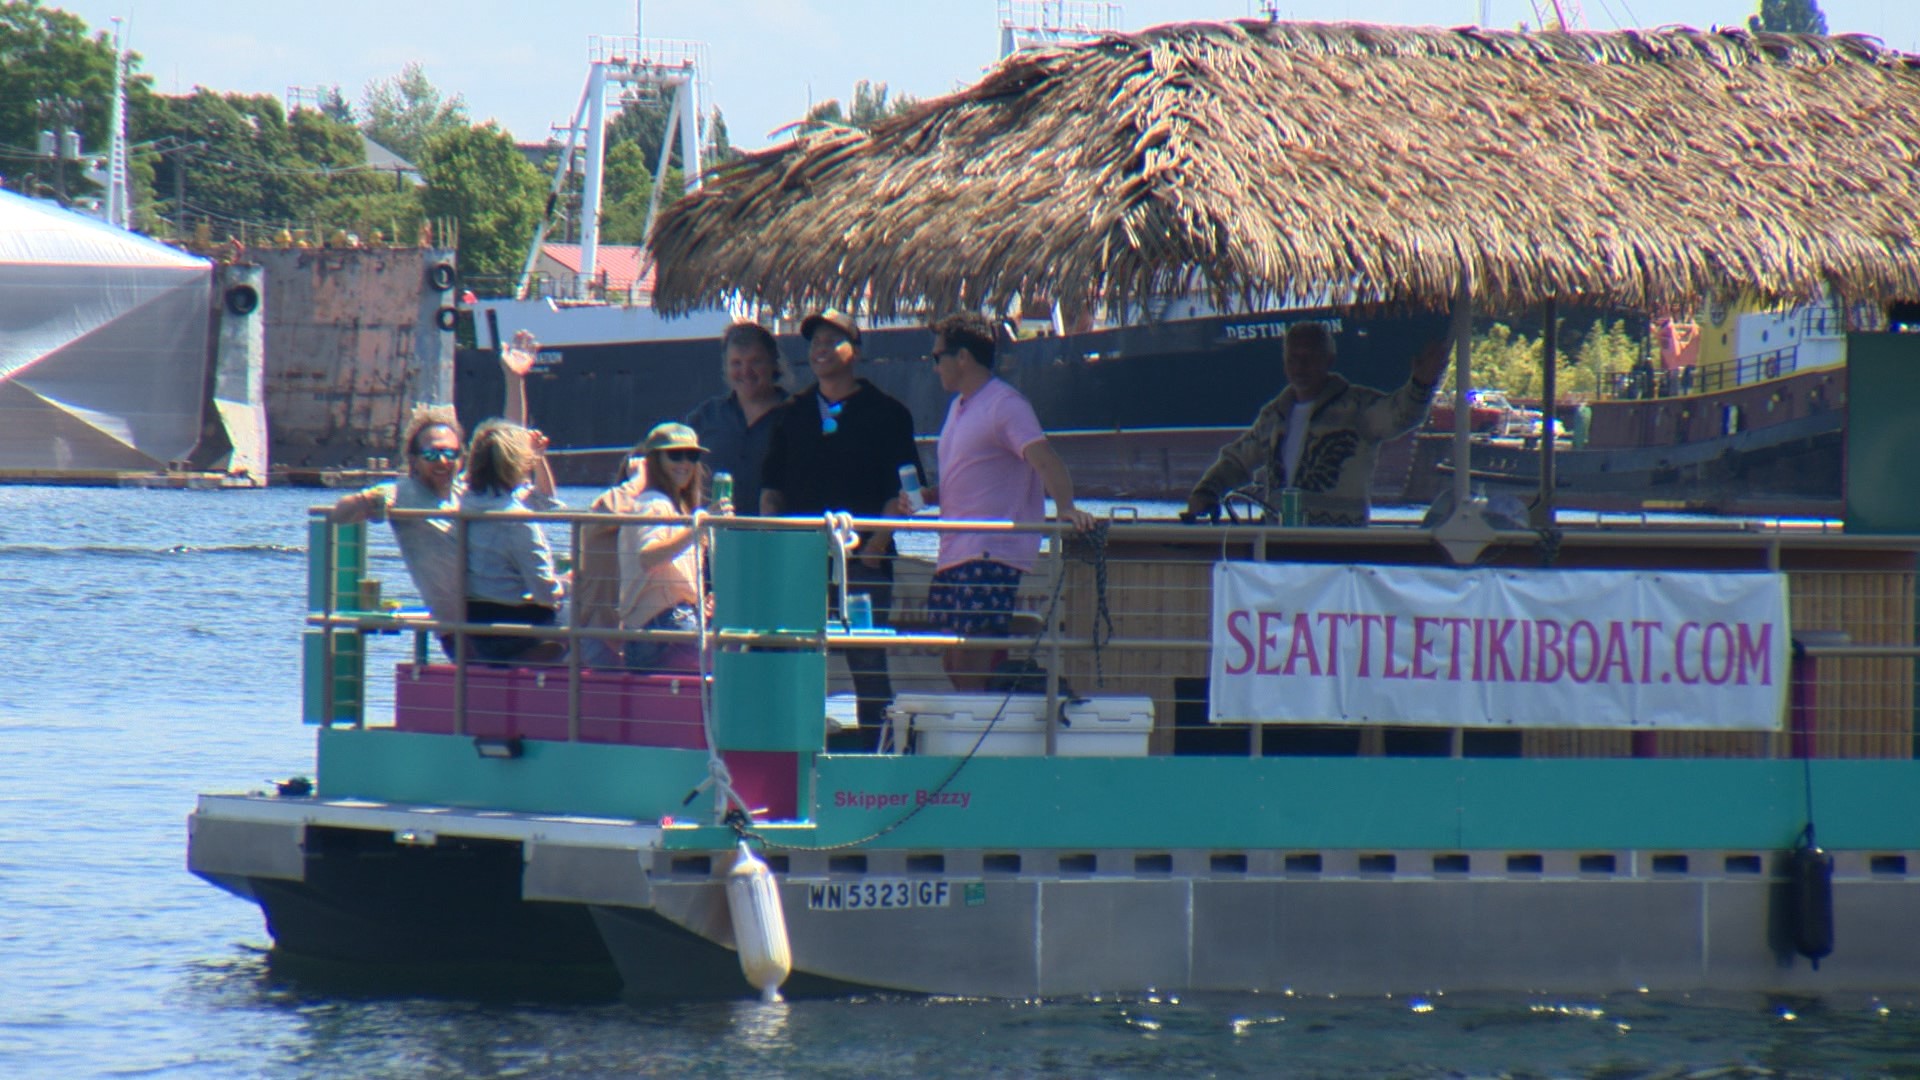 Seattle Tiki Boat is bringing the party to Lake Union.